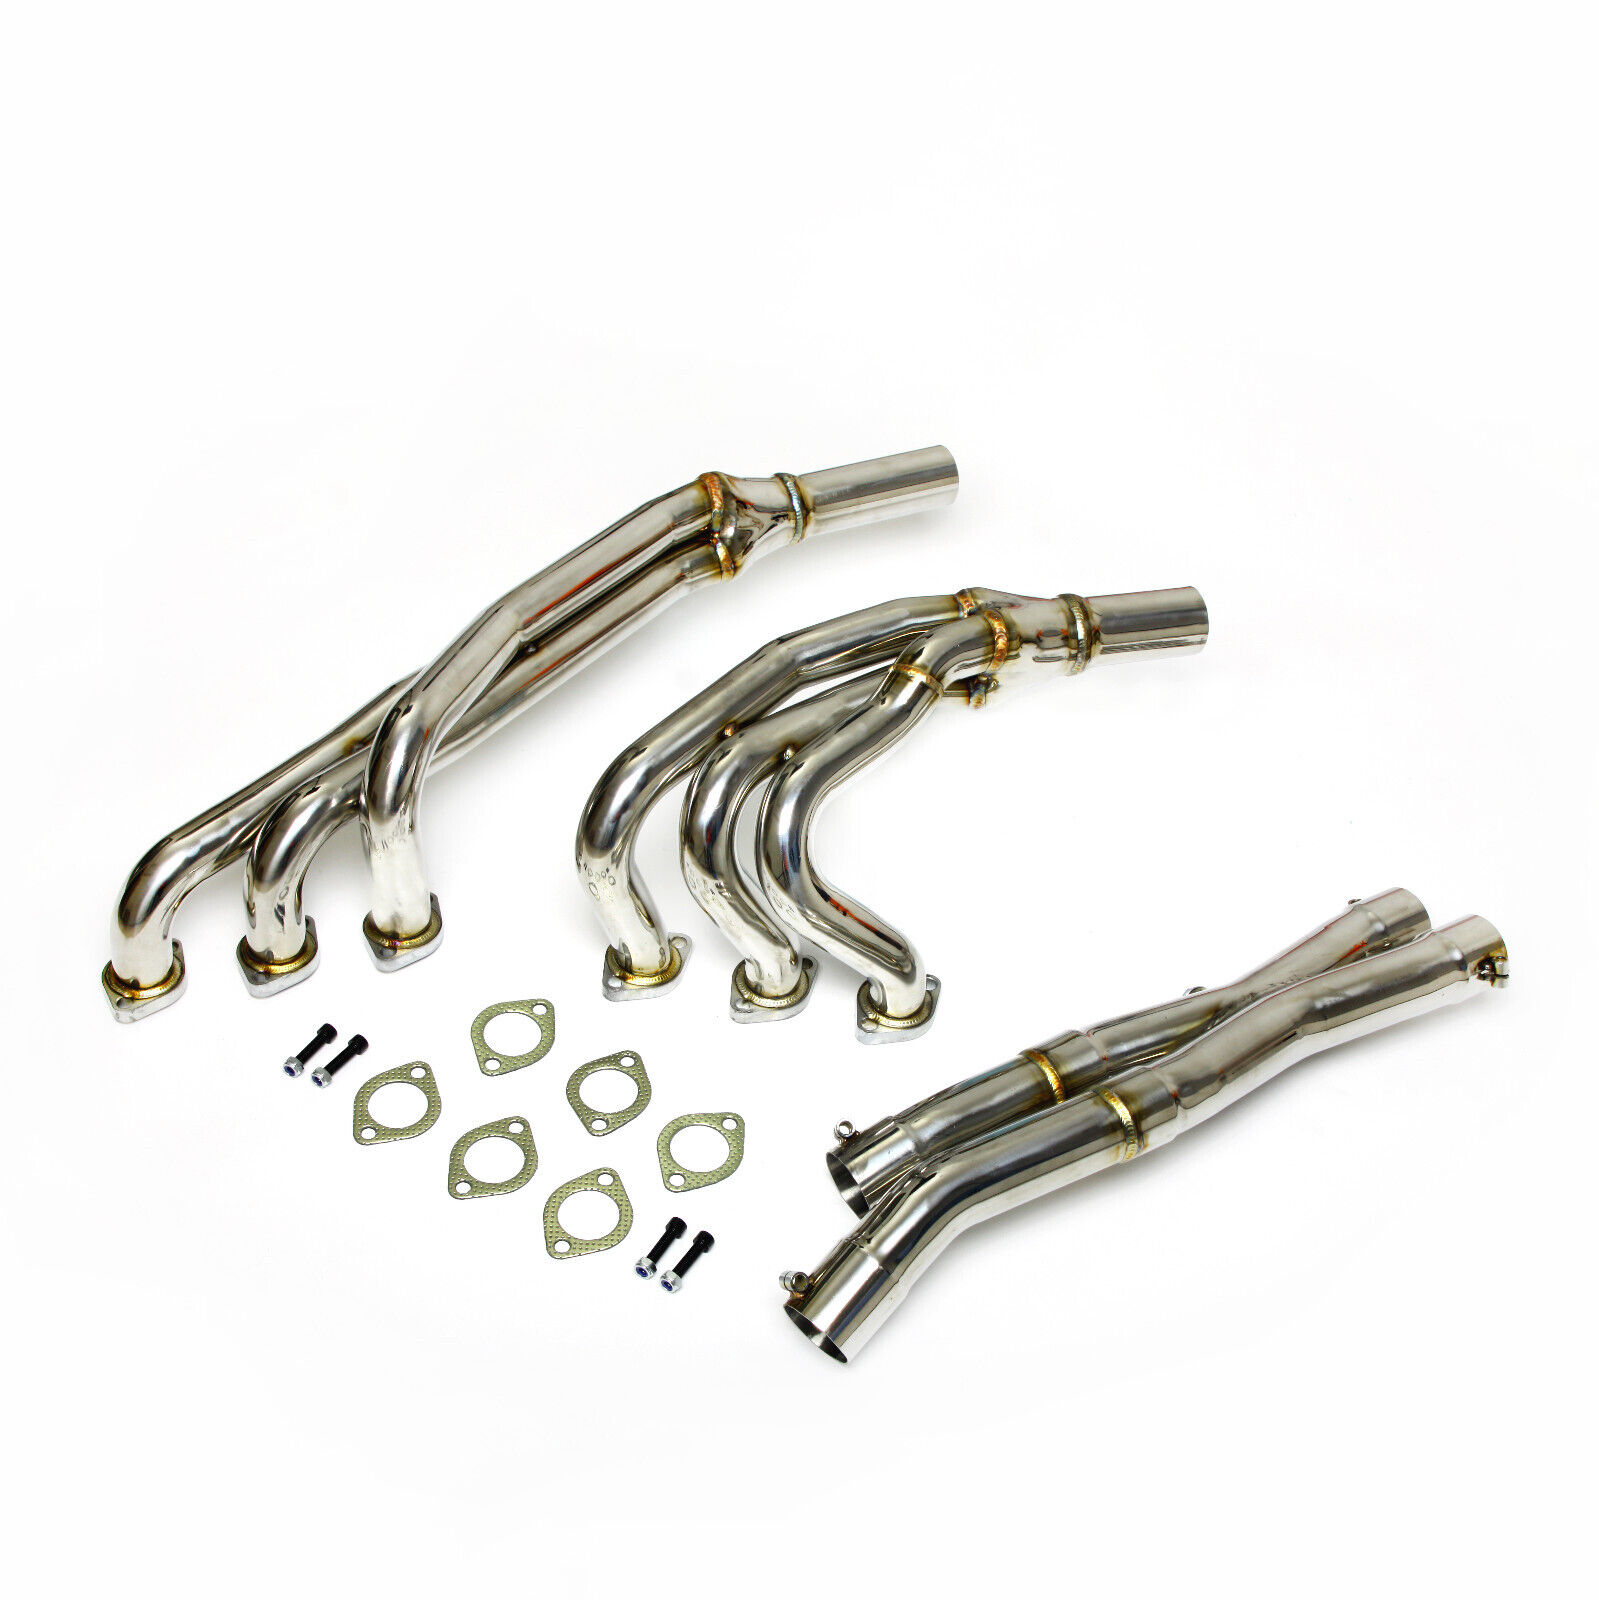 Exhaust Manifold Headers for Bmw E30 E34 All 6cyl M20 Models Left Hand Sport